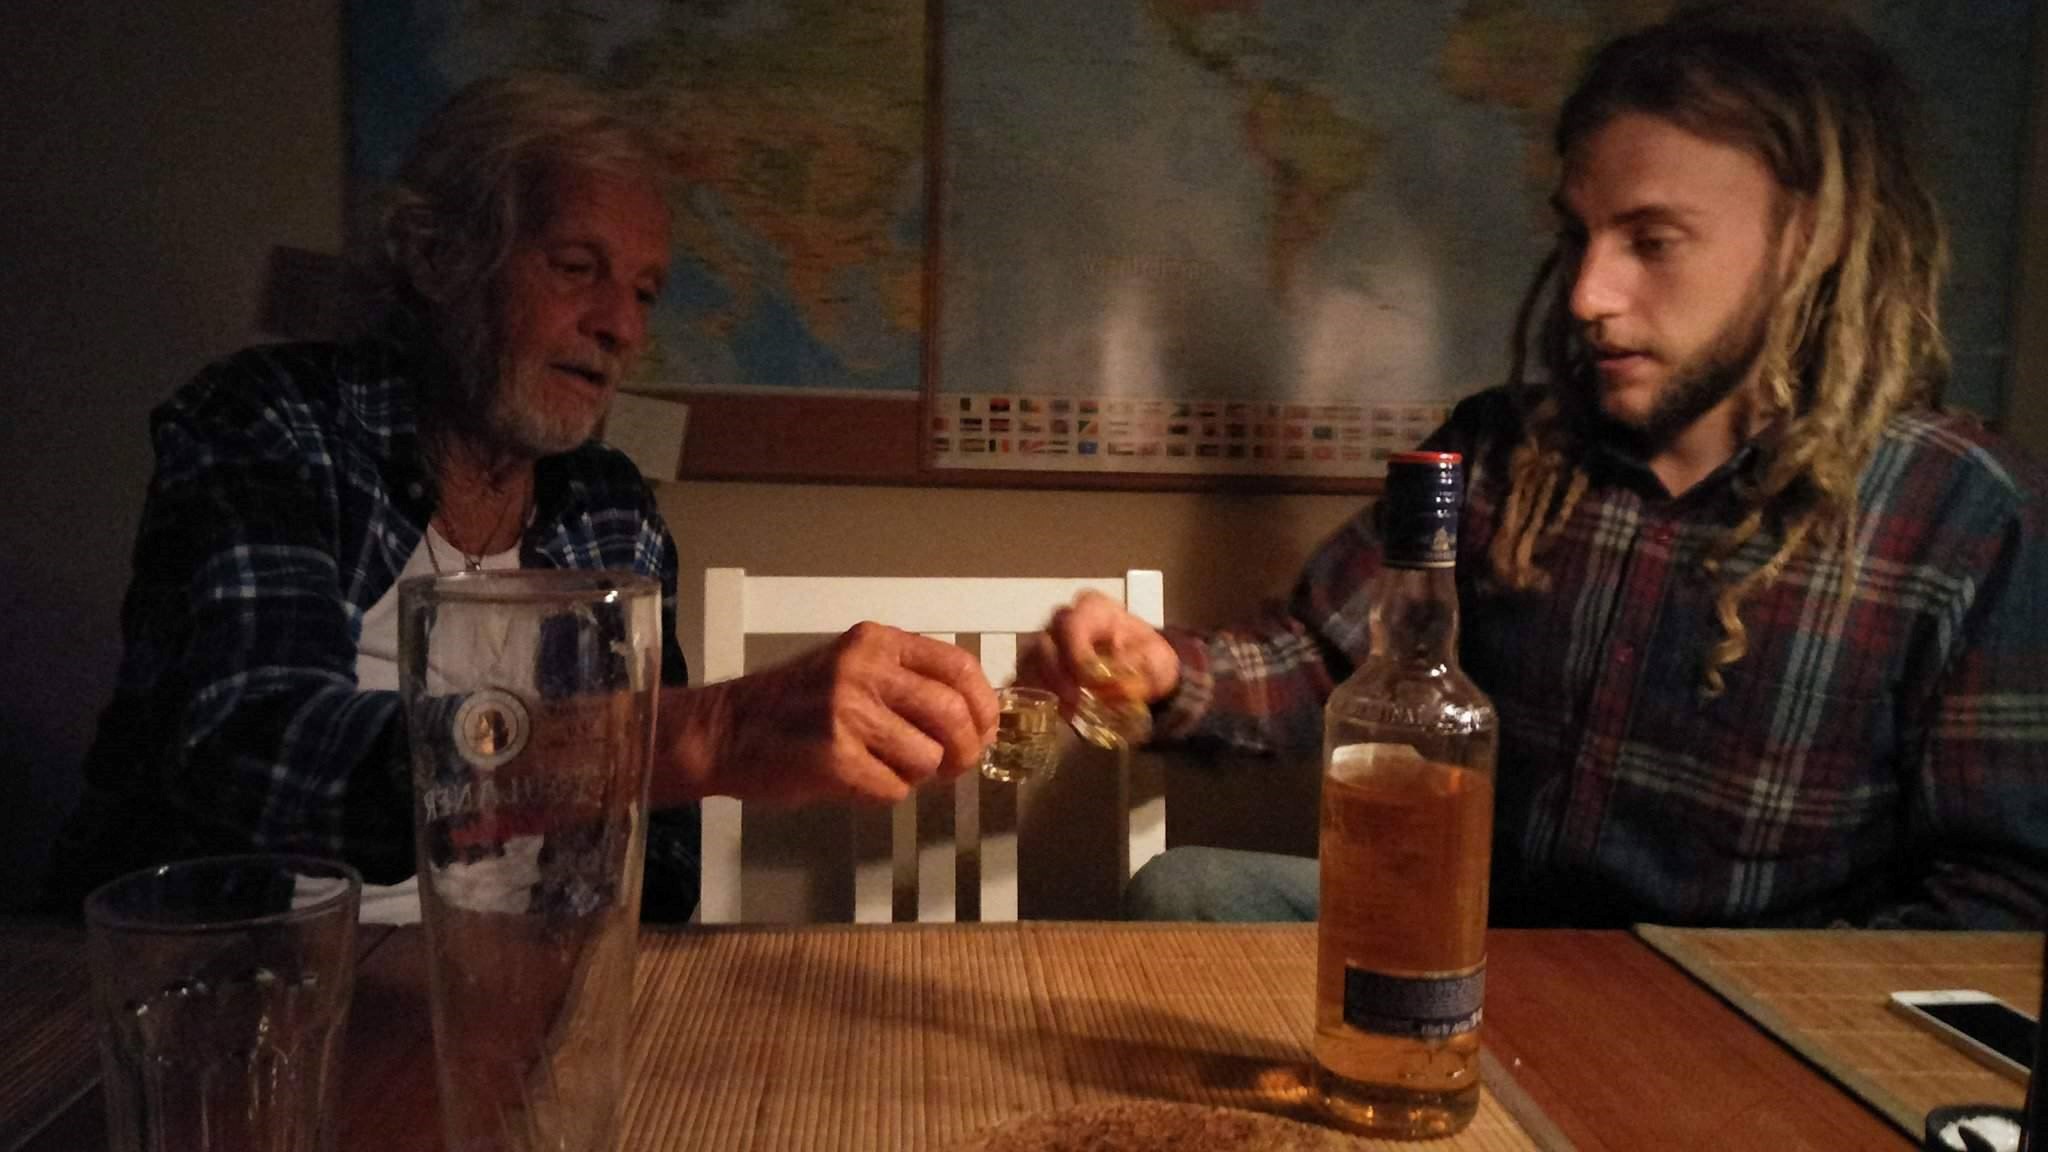 an older man does a shot next to a younger man in a bar